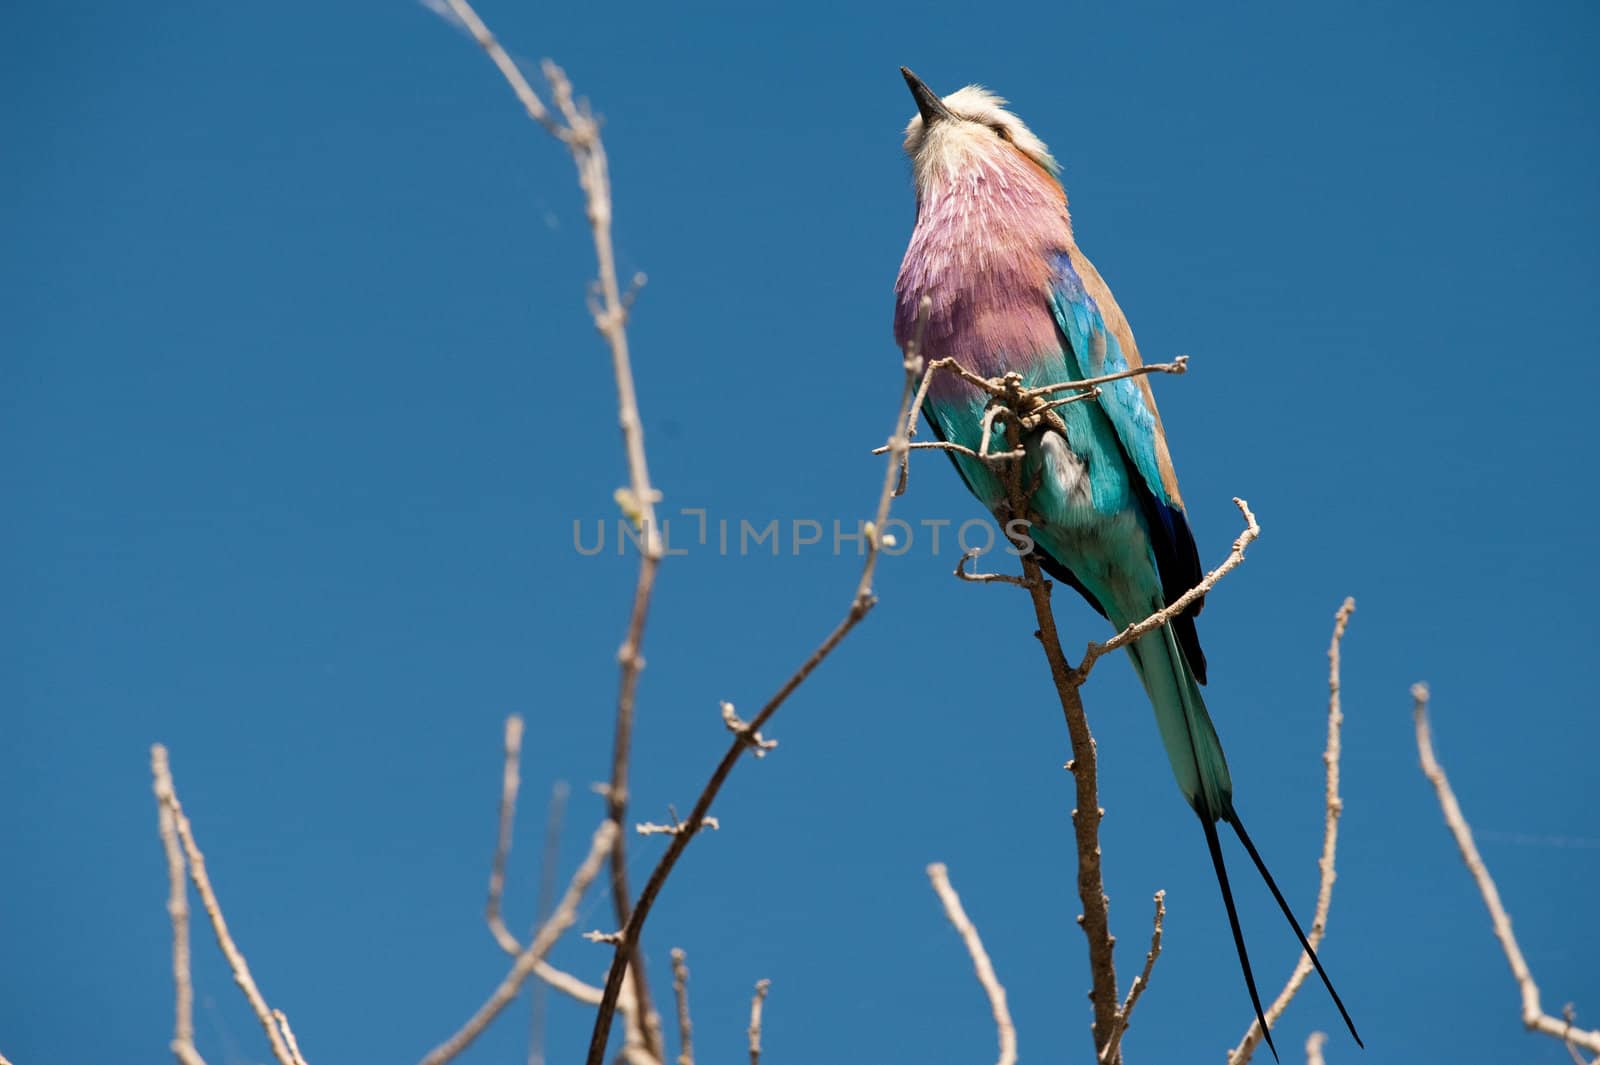 Lilac-breasted roller by edan